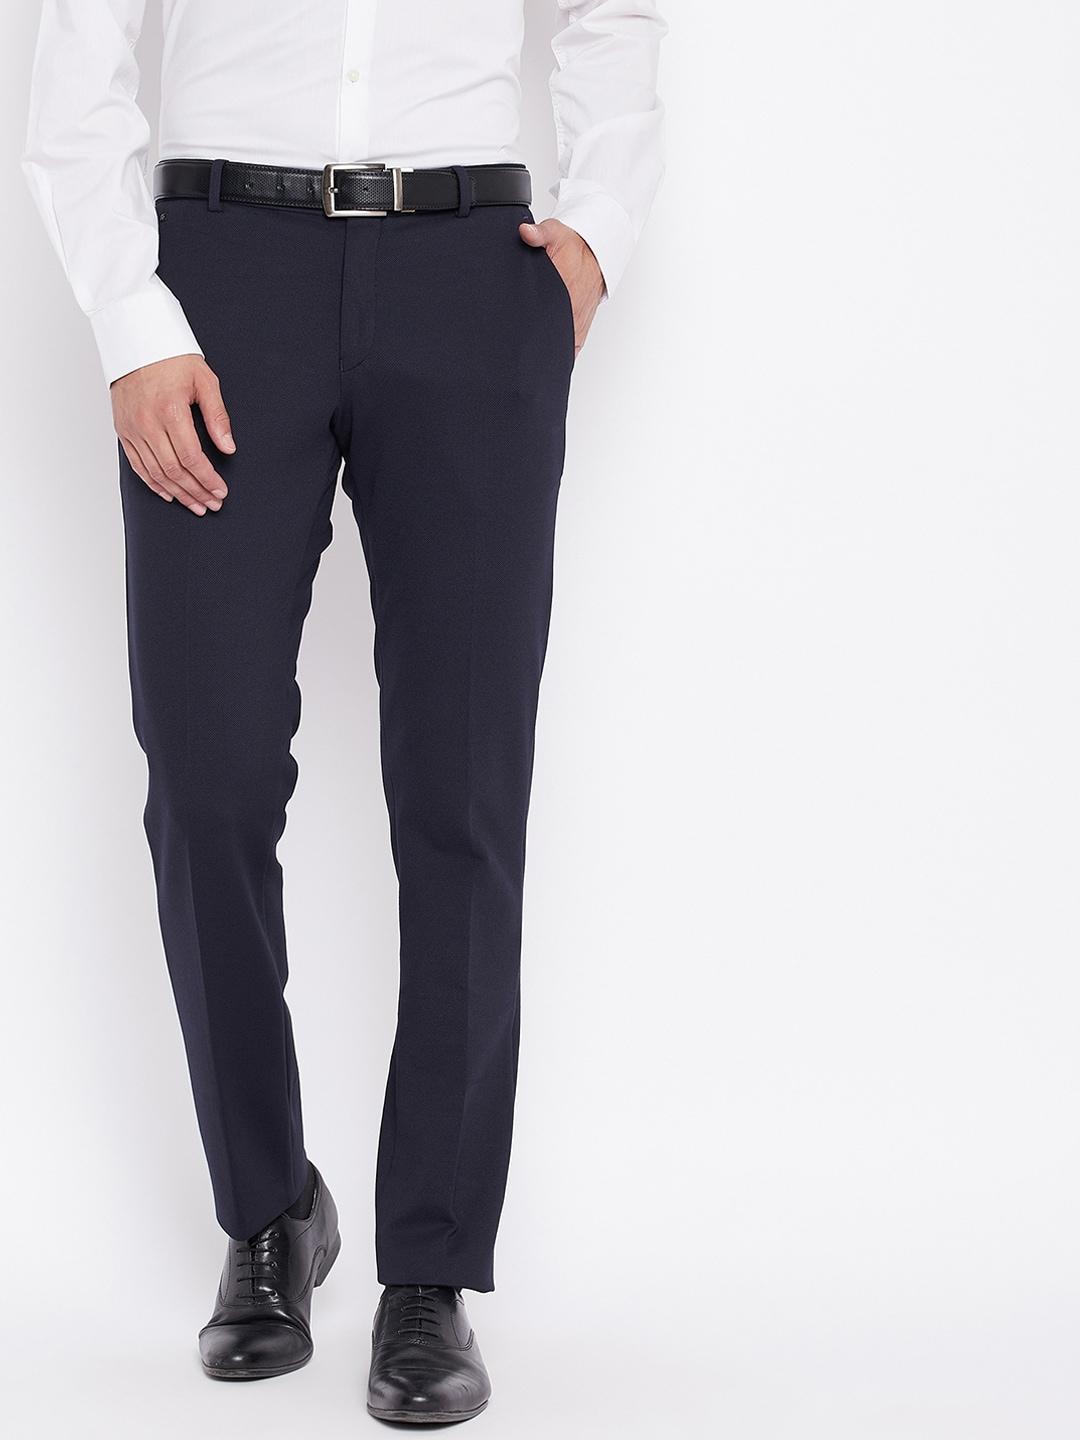 cantabil-men-navy-blue-easy-wash-formal-trousers